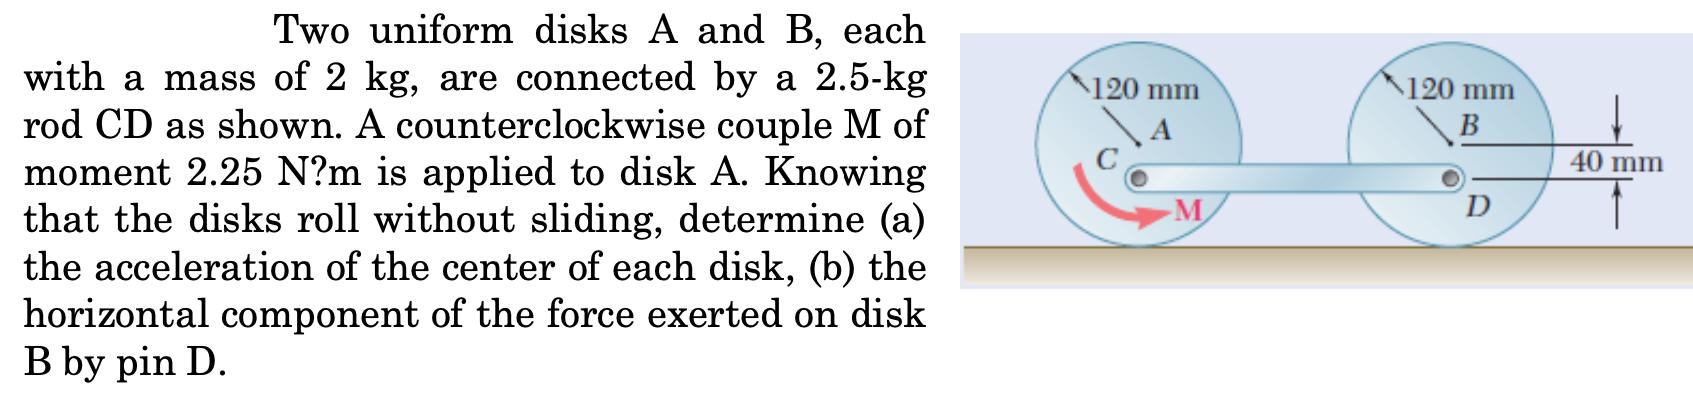 Two uniform disks A and B, each with a mass of 2 kg, are connected by a 2.5-kg rod CD as shown. A